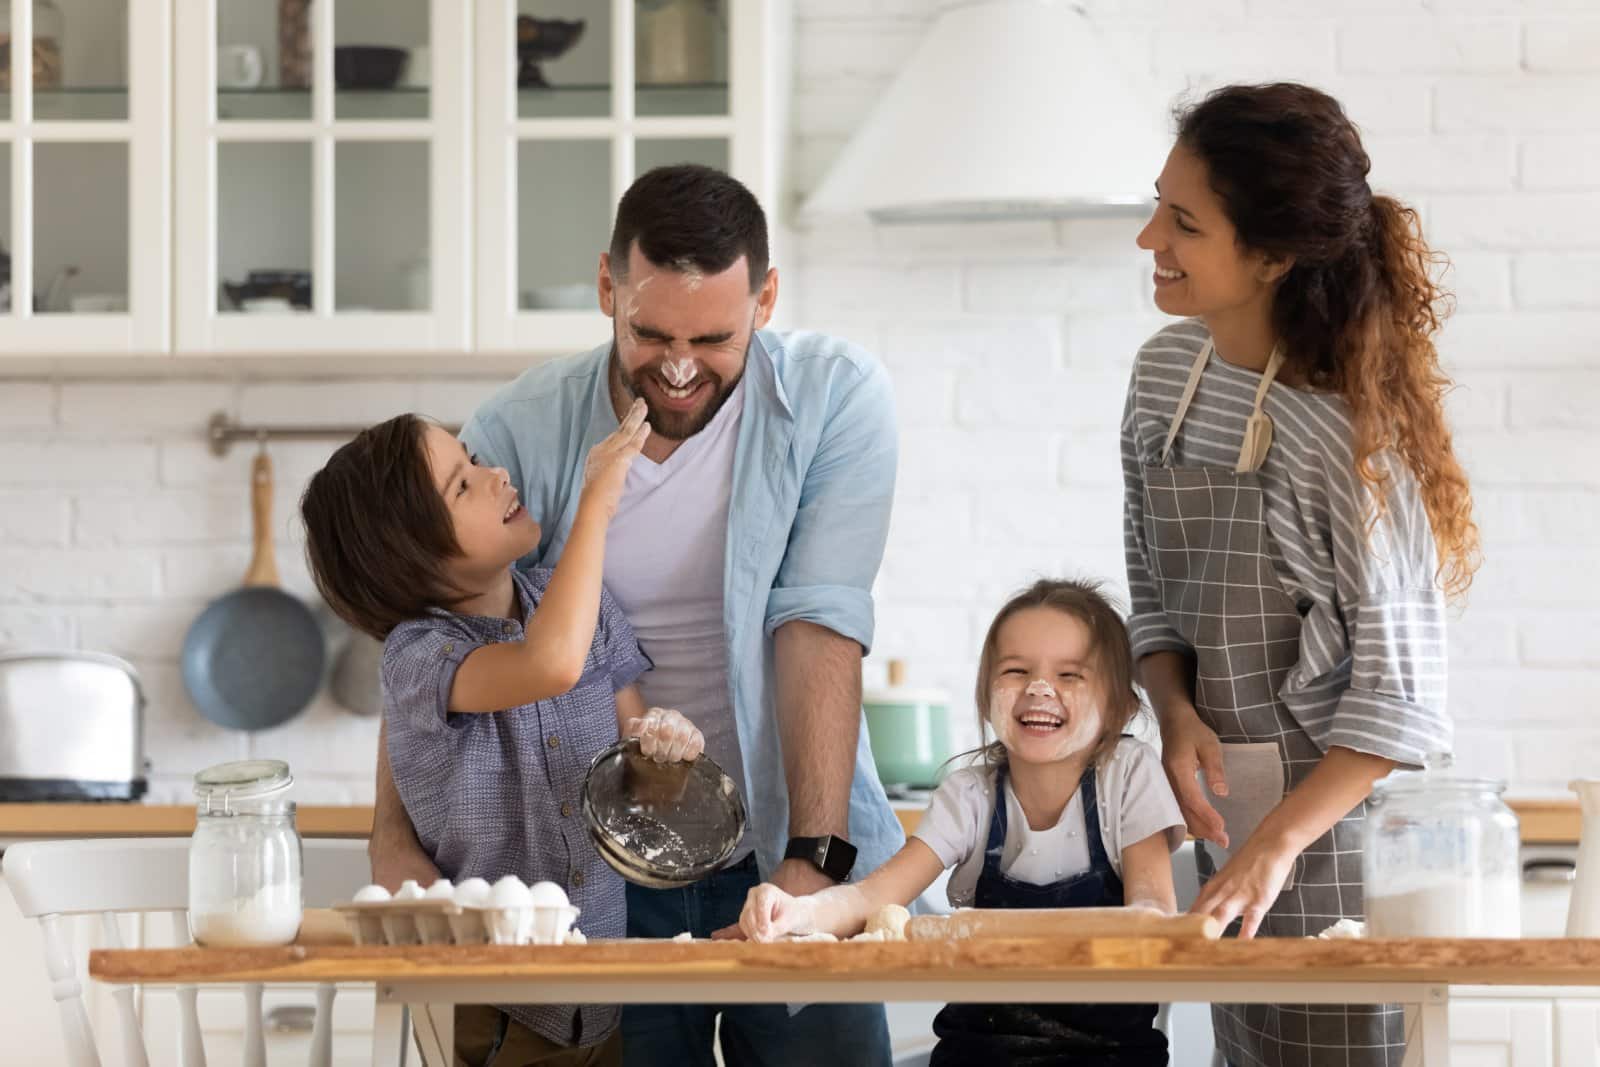 <p><span>One of the most important things to improve a work-life balance is allowing employees to spend precious time with their families. Working from home removes travel time, meaning employees can wave their kids off to school and spend meals together as a family.</span></p>